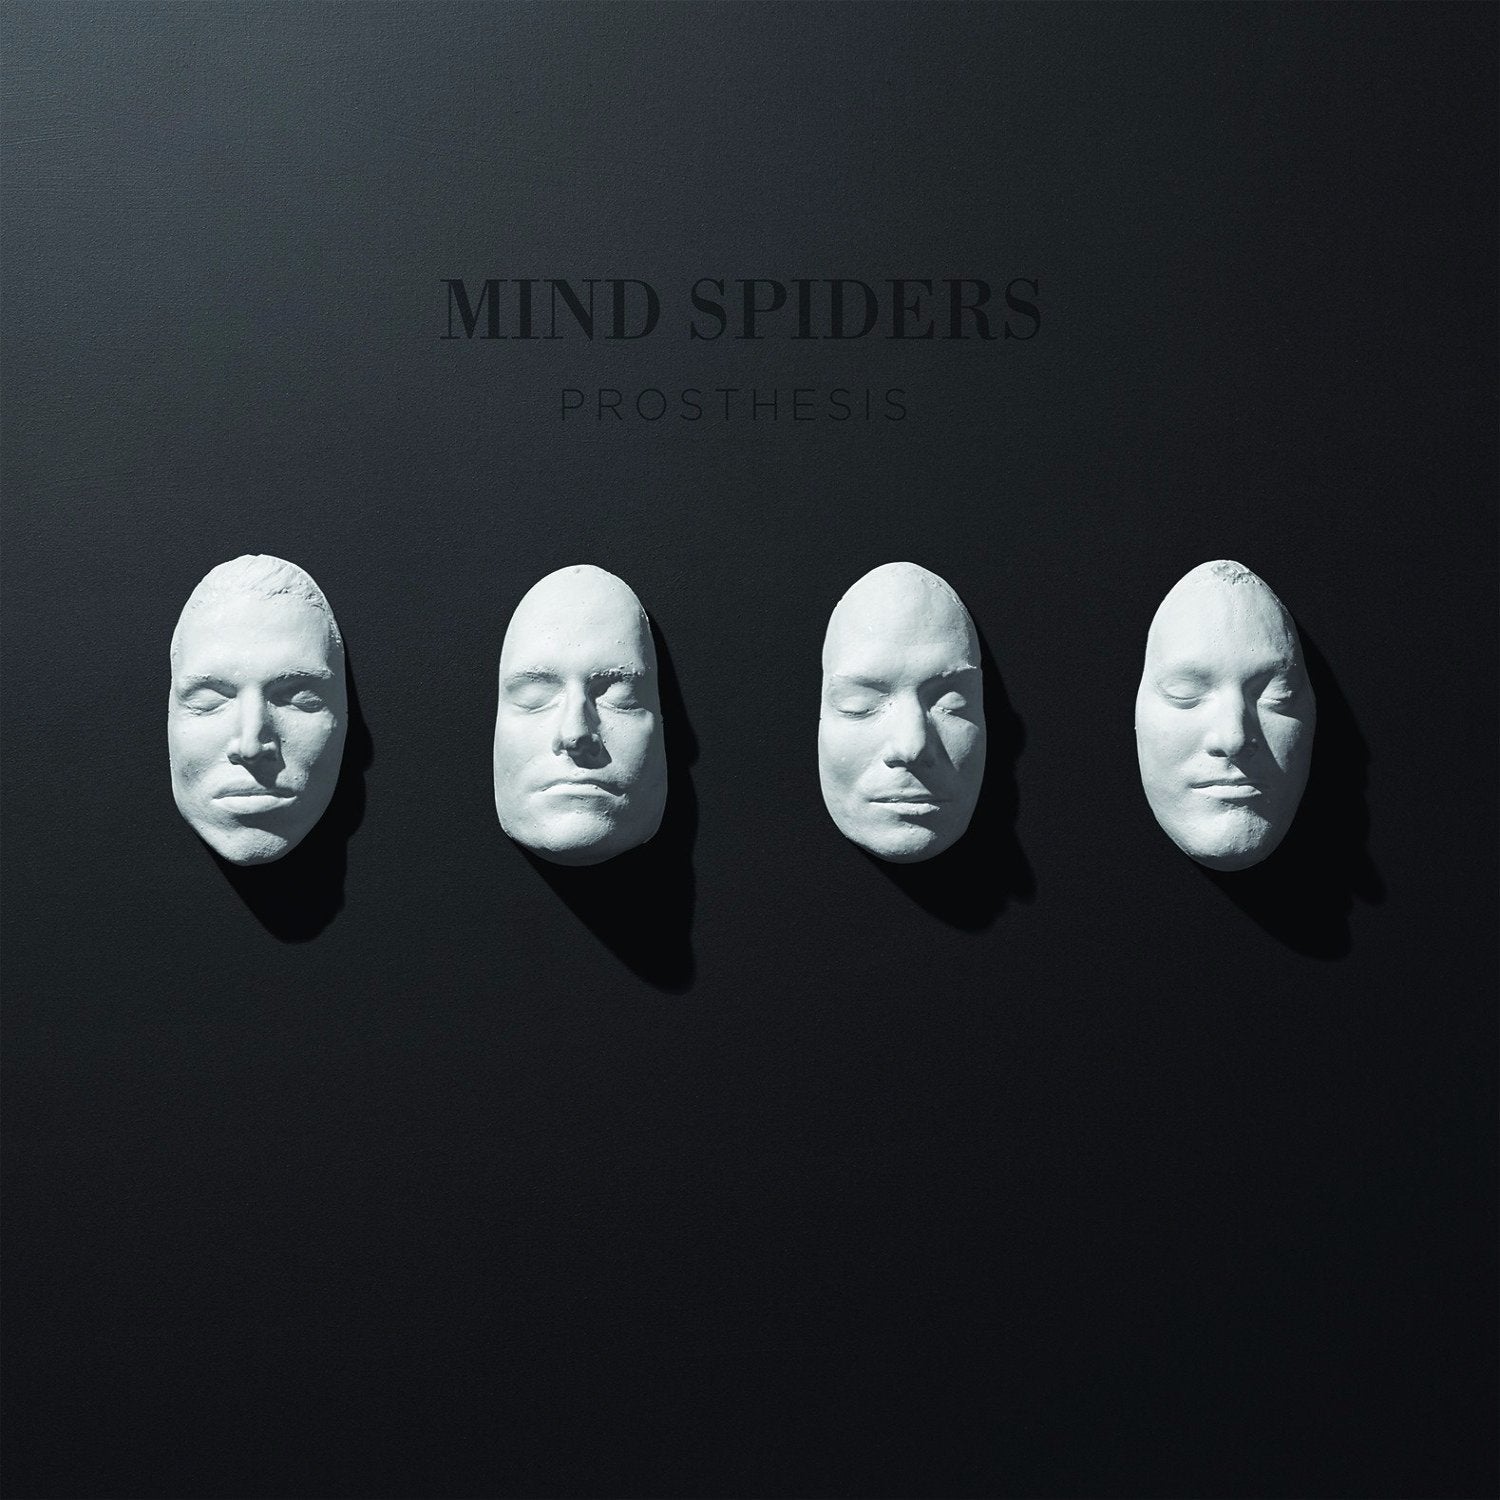 Mind Spiders - Prosthesis [CLEAR VINYL] - New LP